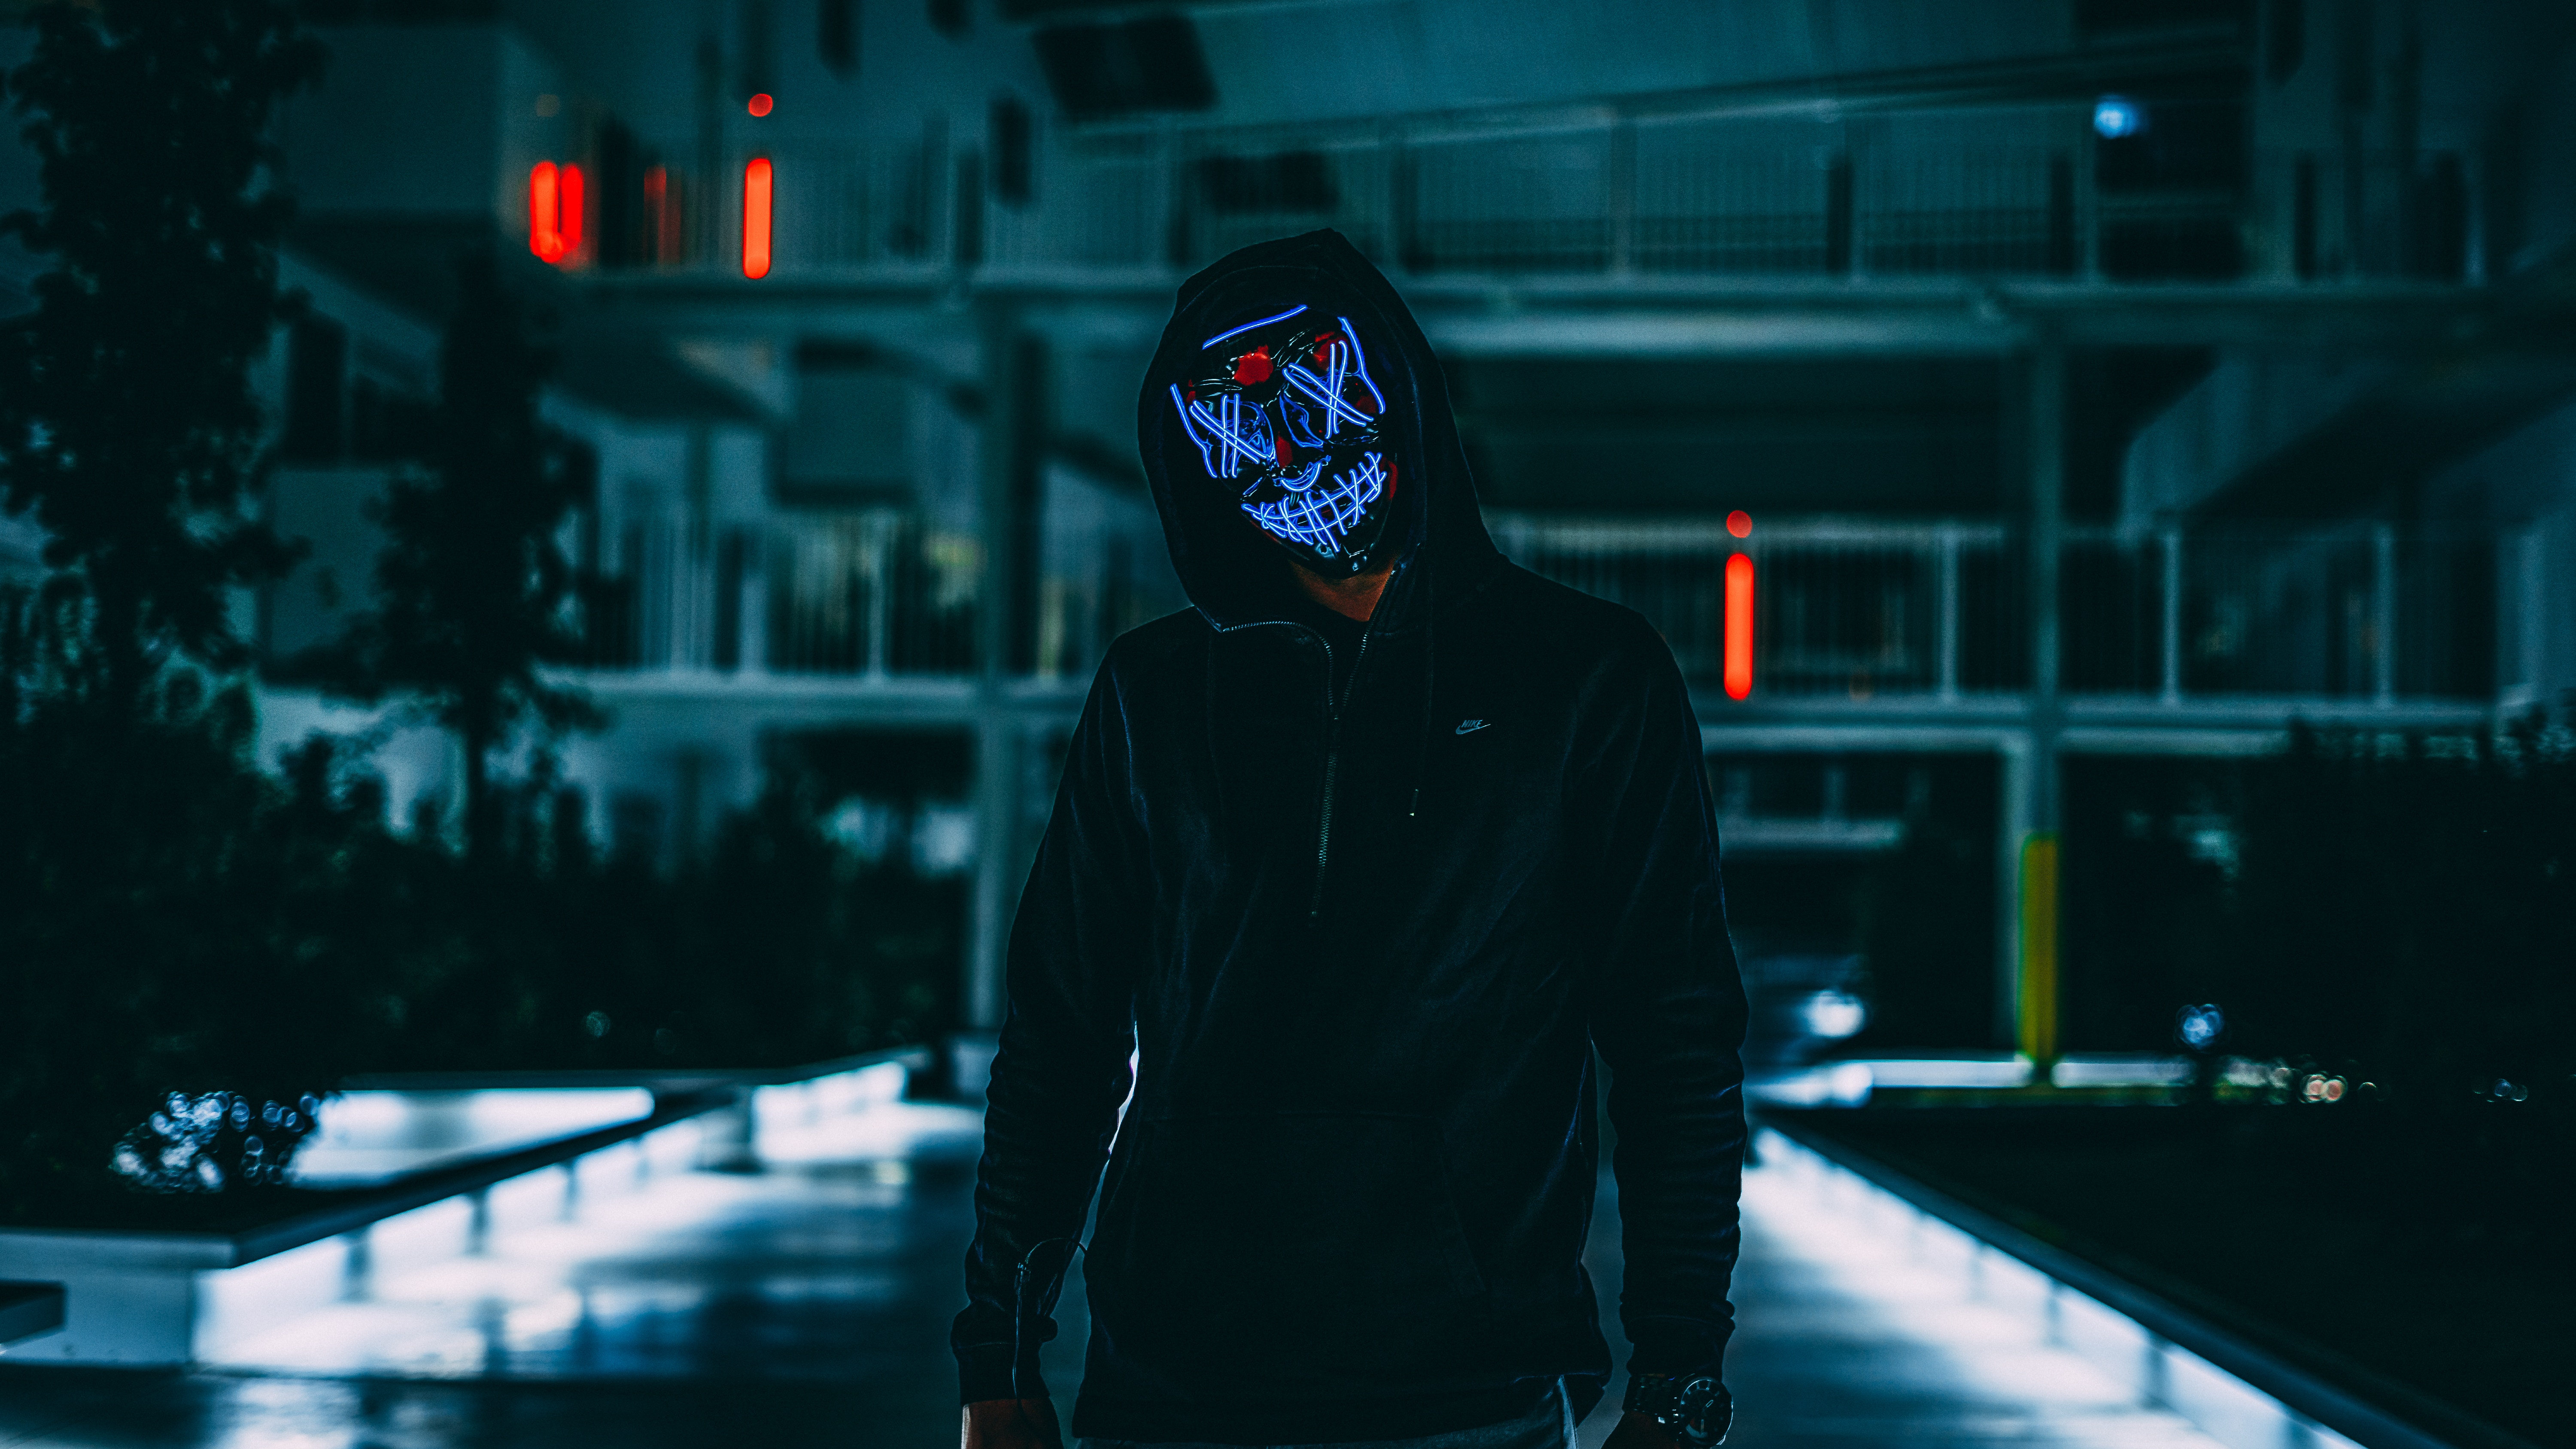 151829 free wallpaper 720x1280 for phone, download images hood, glow, mask, darkness 720x1280 for mobile